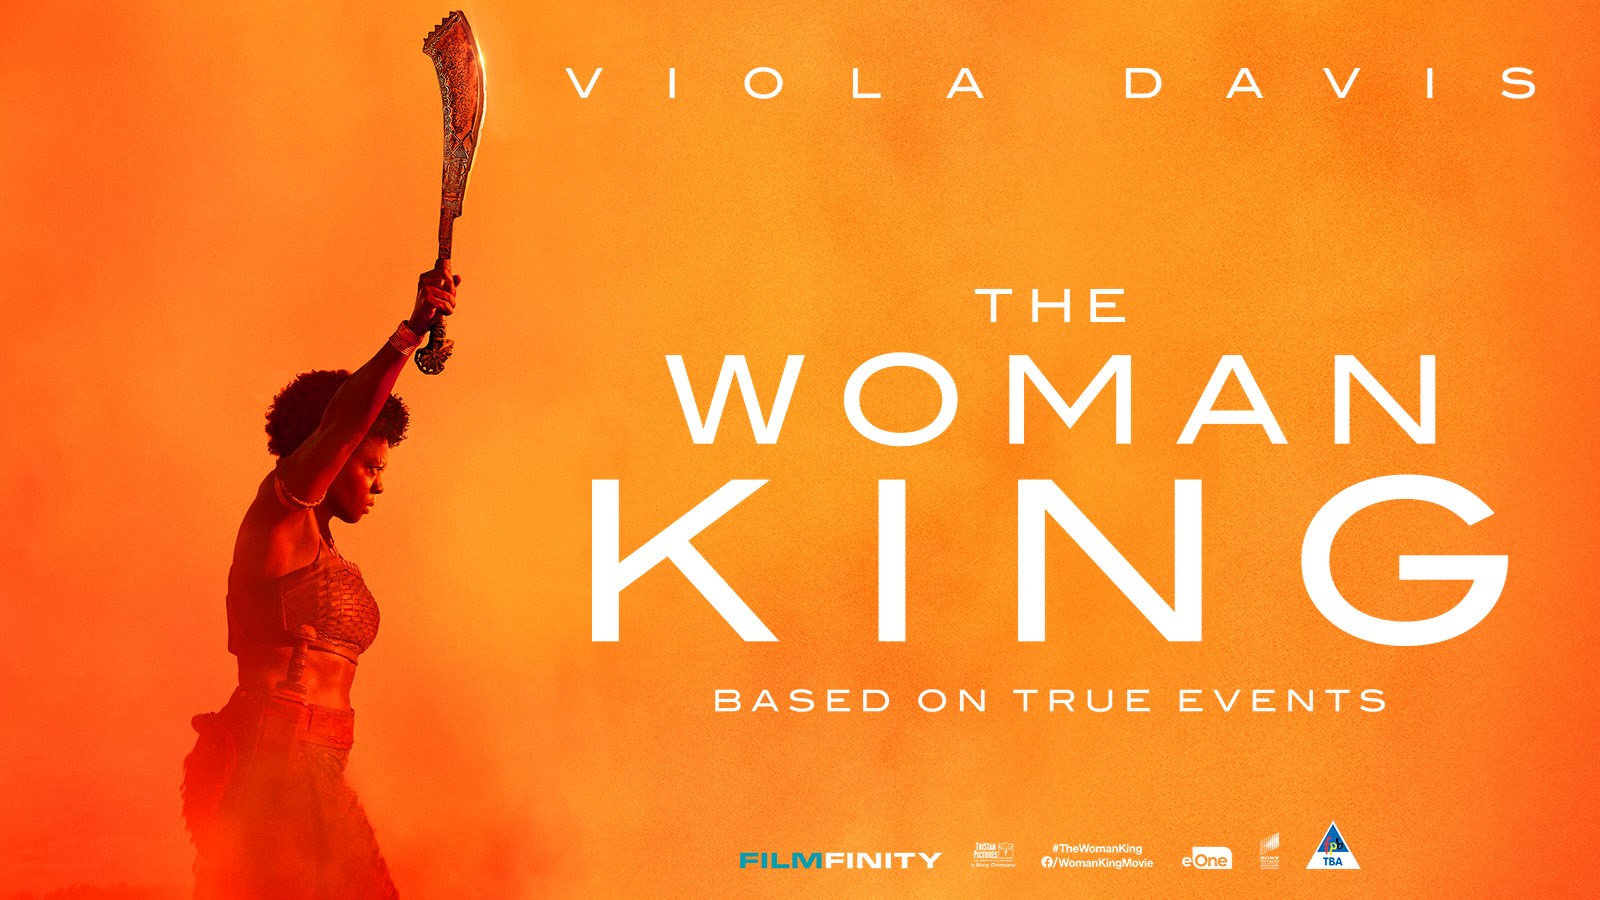 WOMAN KING, THE